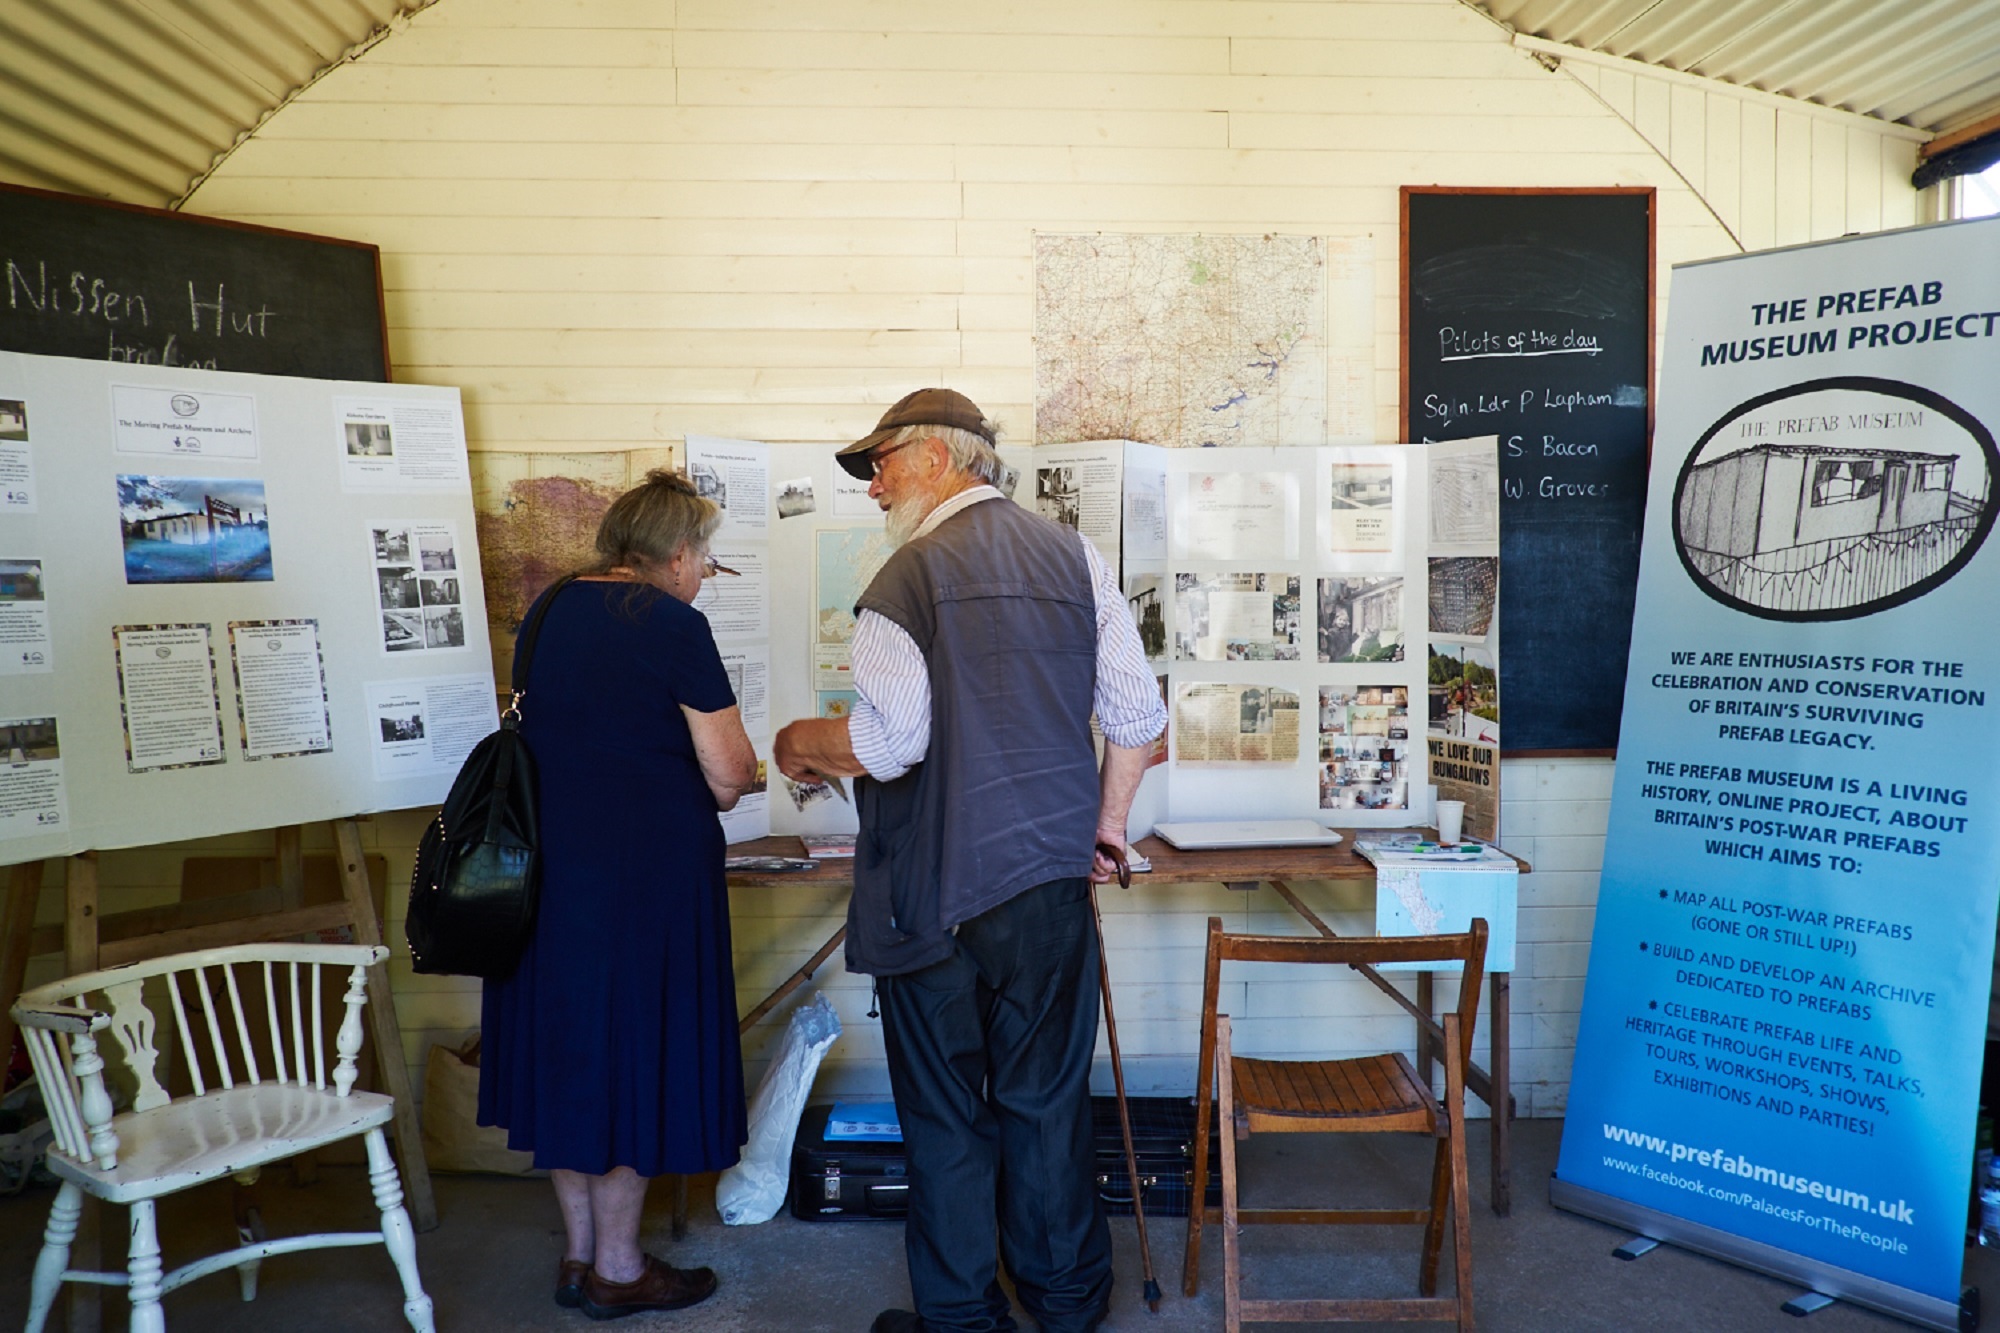 Moving Prefab event: Chiltern Open Air Museum 23 August 2016